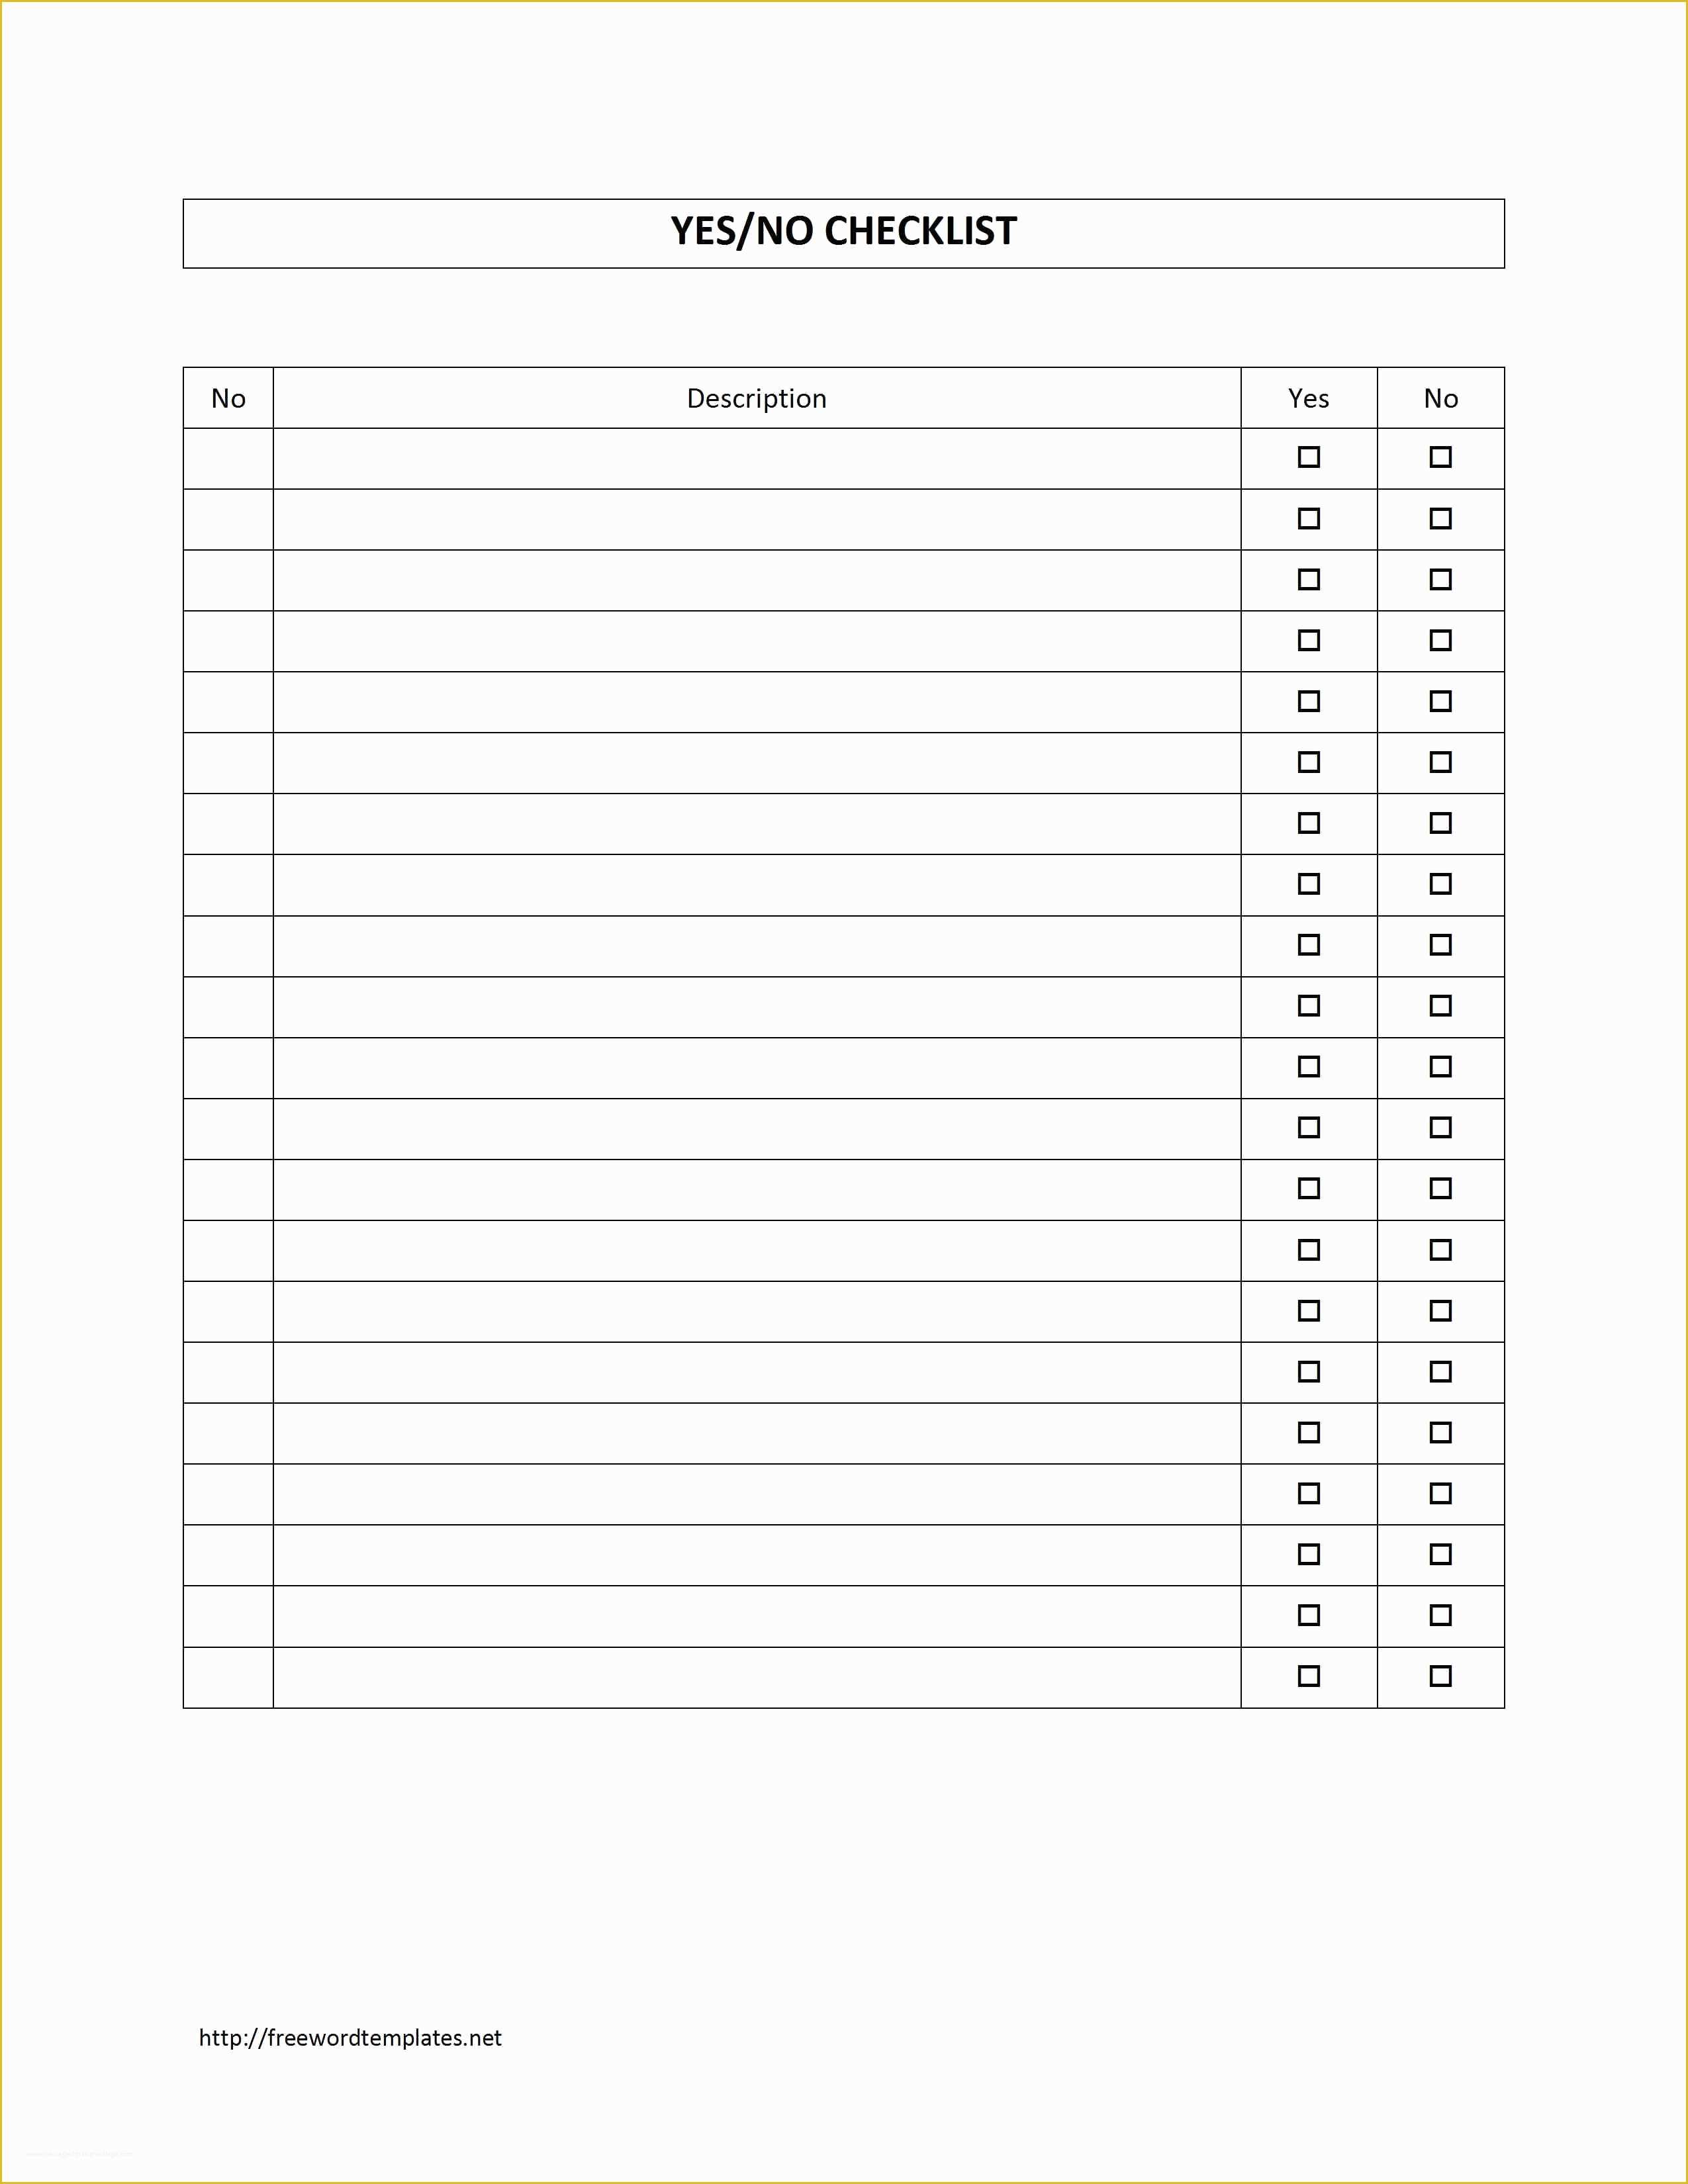 Free Checklist Template Word Of Yes No Checklist